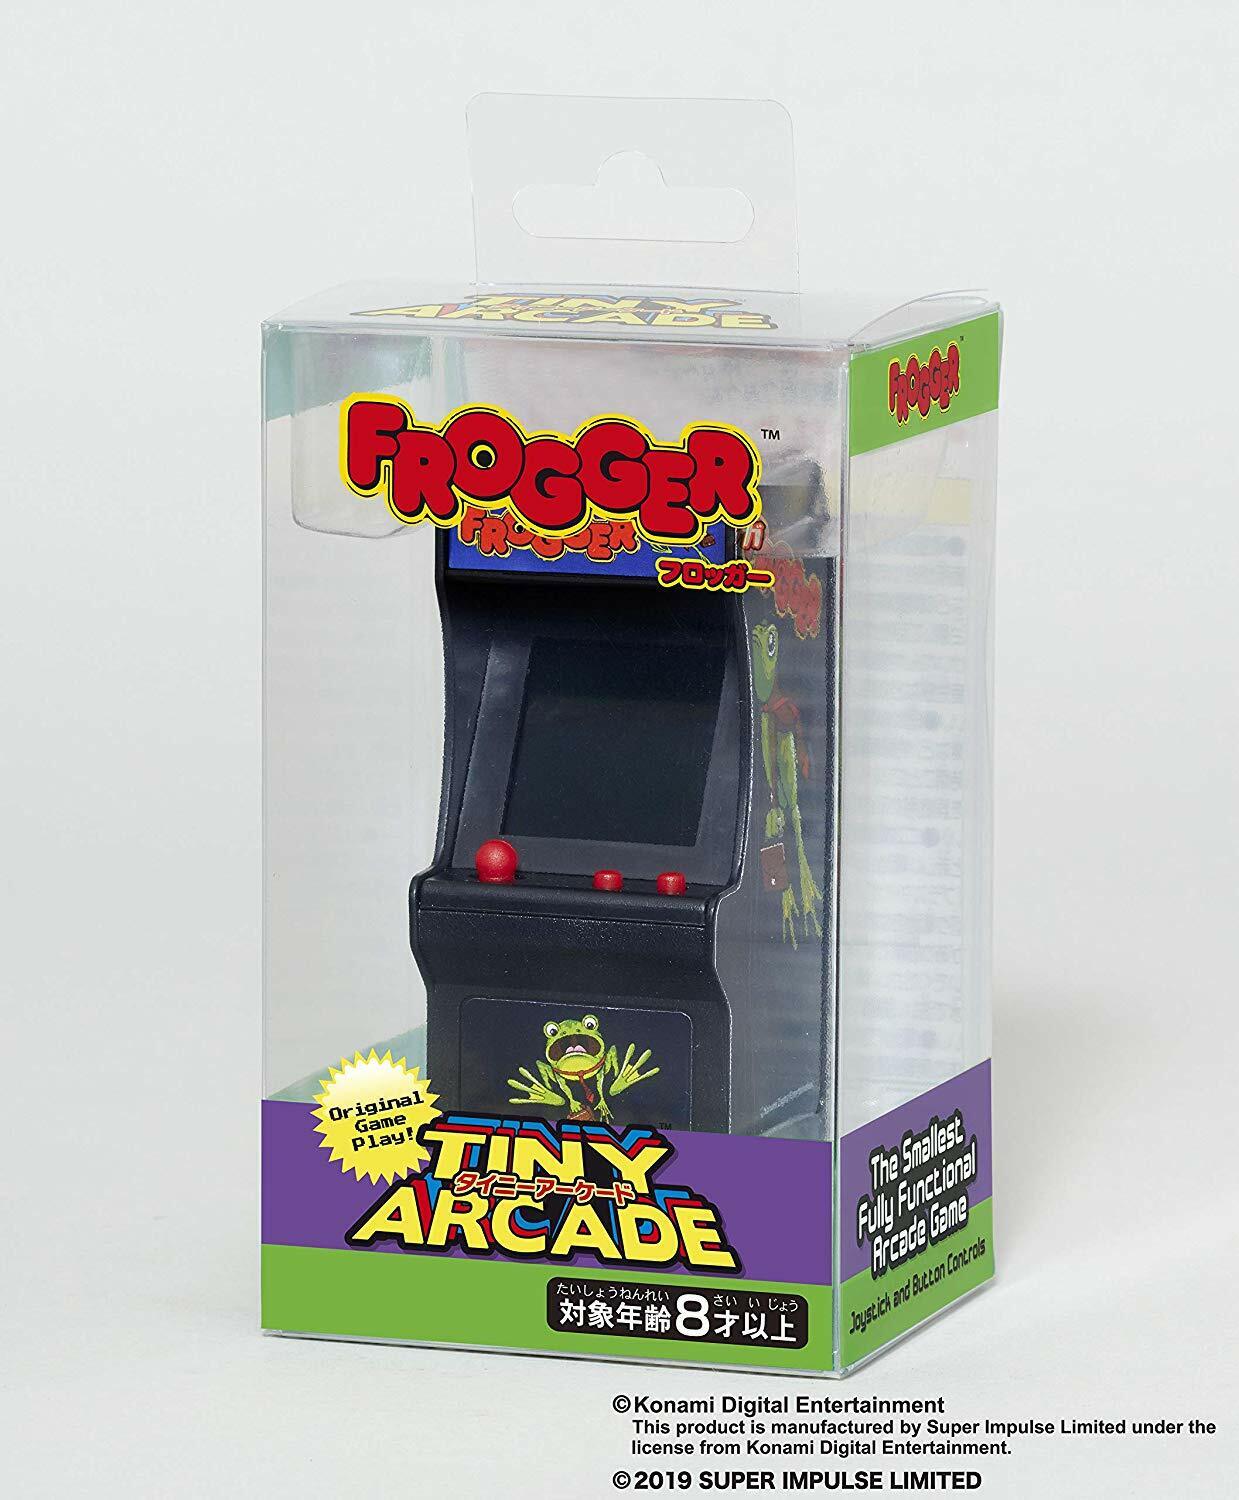 NEW TINY ARCADE Frogger Miniature Arcade Game from Japan F/S